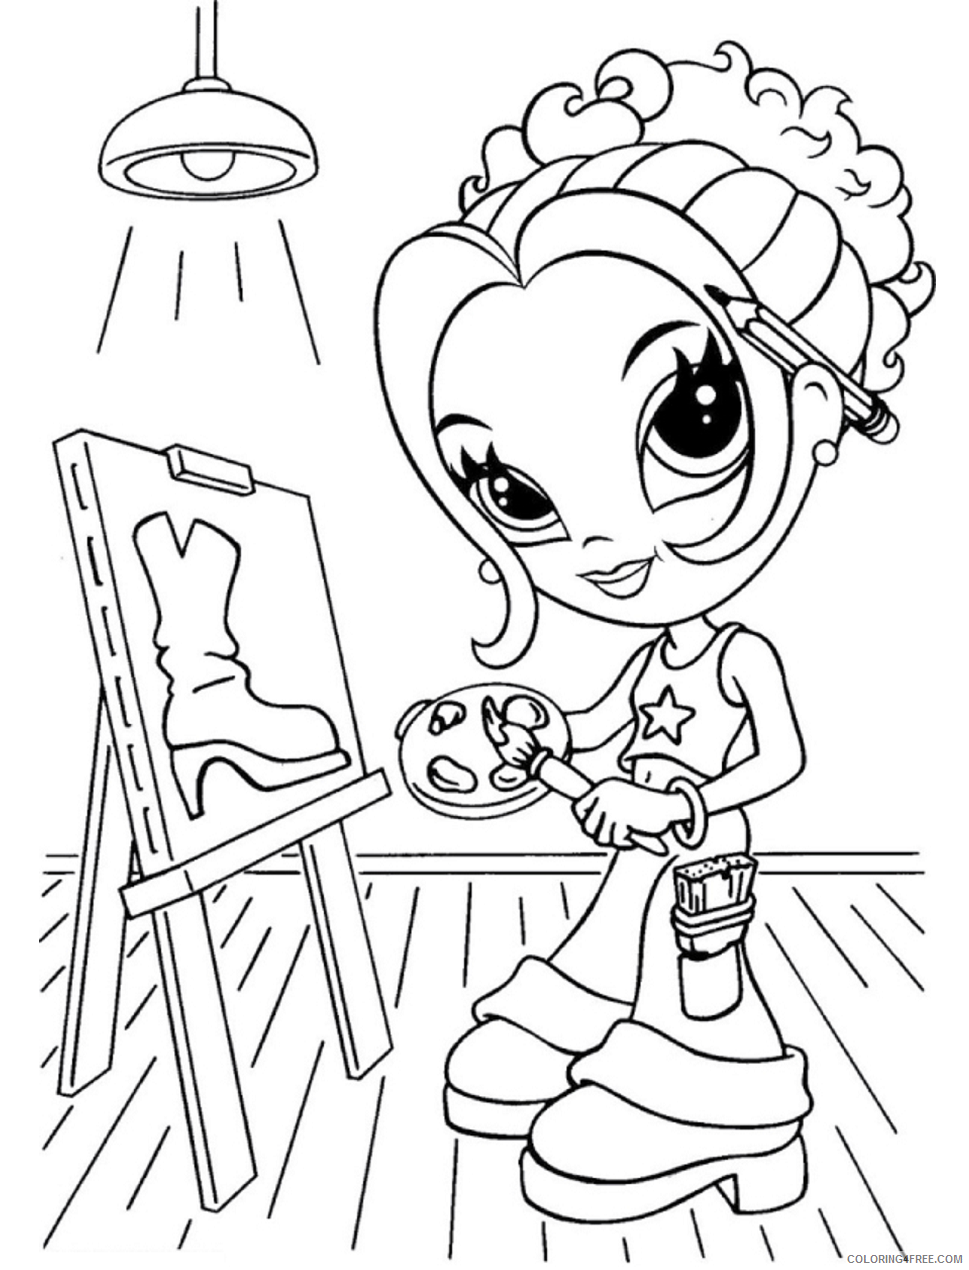 Girl Coloring Pages for Girls glamour_girl_painting Printable 2021 0500 ...